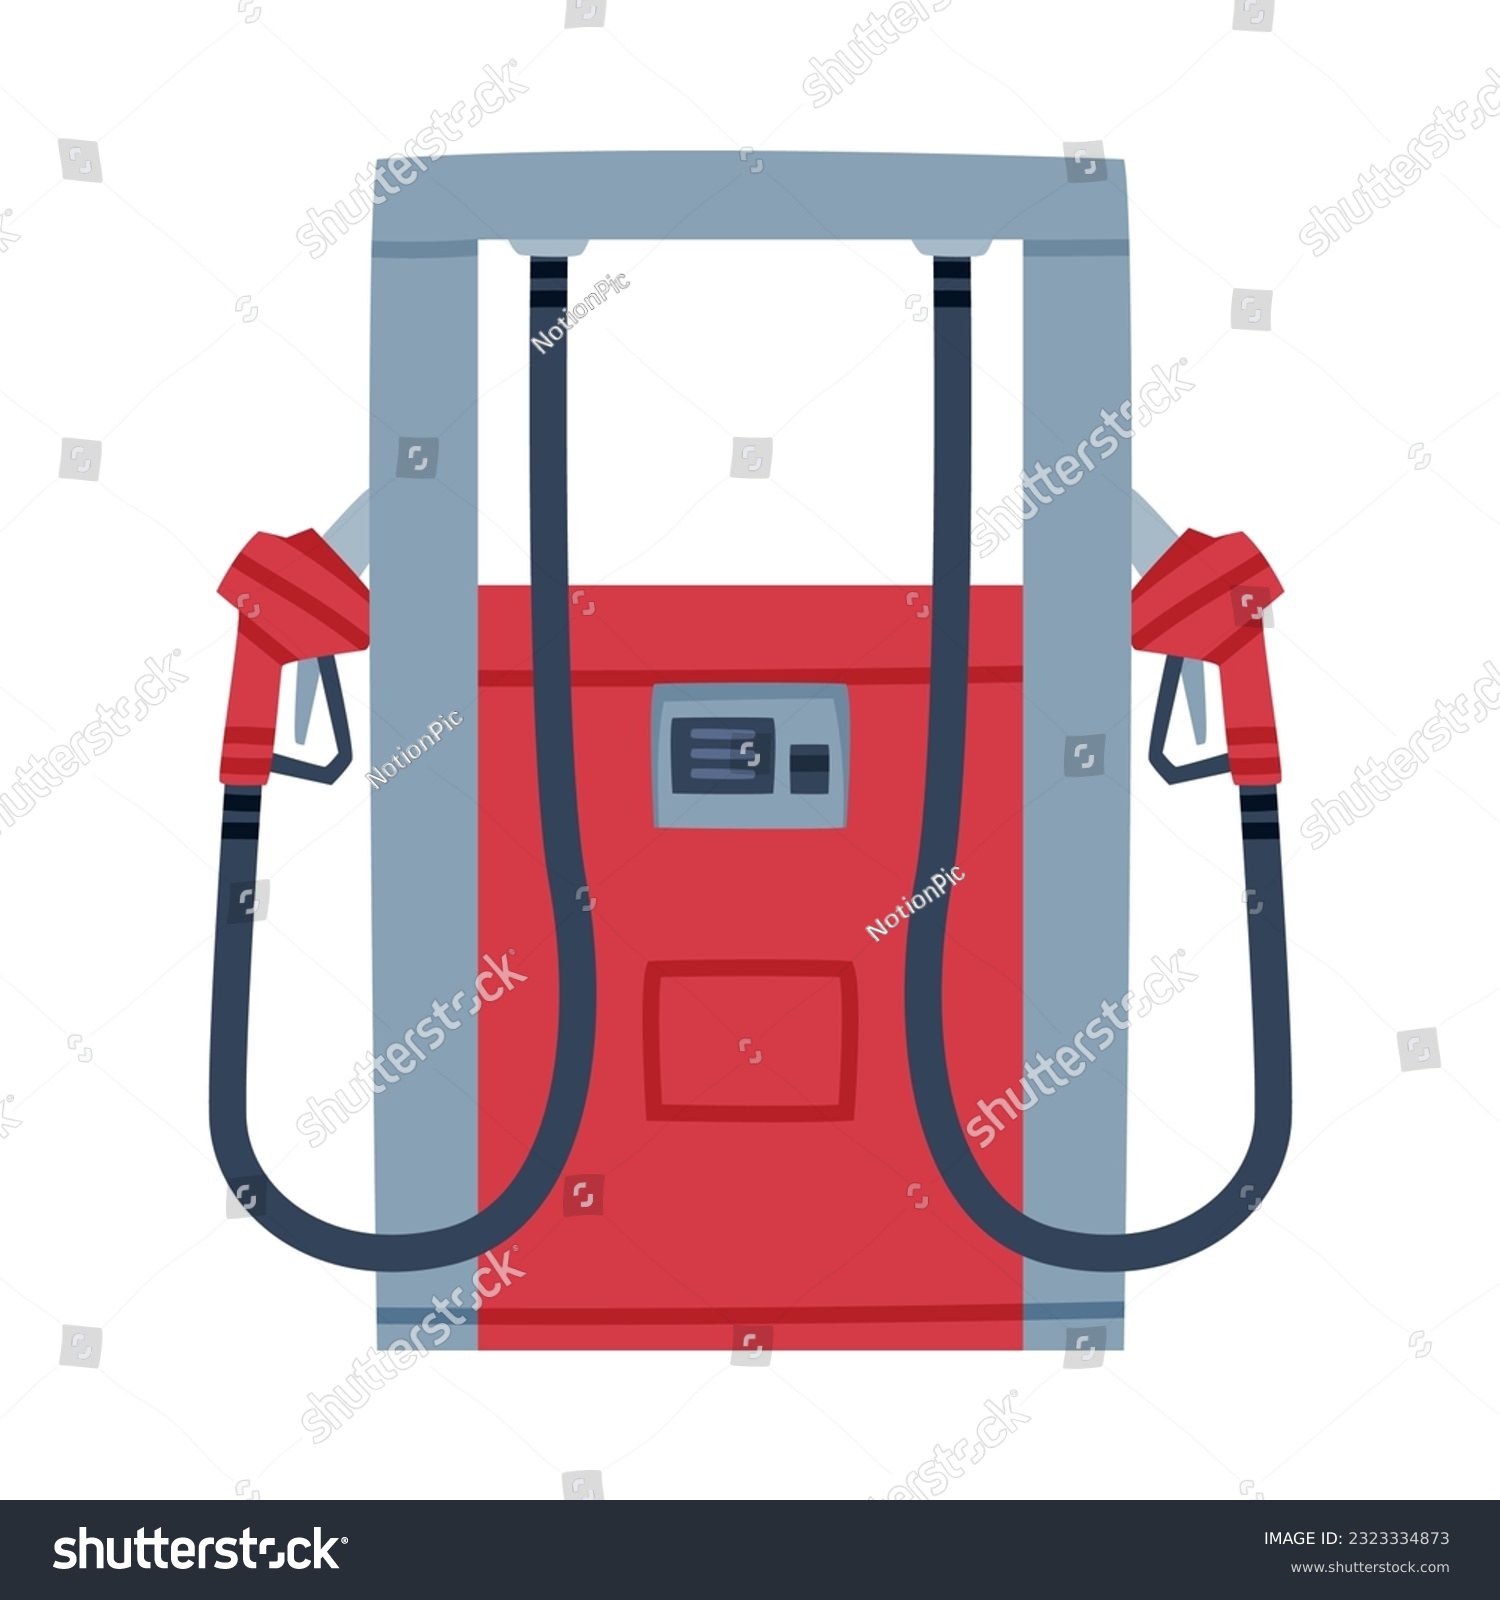 SVG of Gas Filling Station with Gasoline Pump as Facility with Fuel for Motor Vehicle Vector Illustration svg